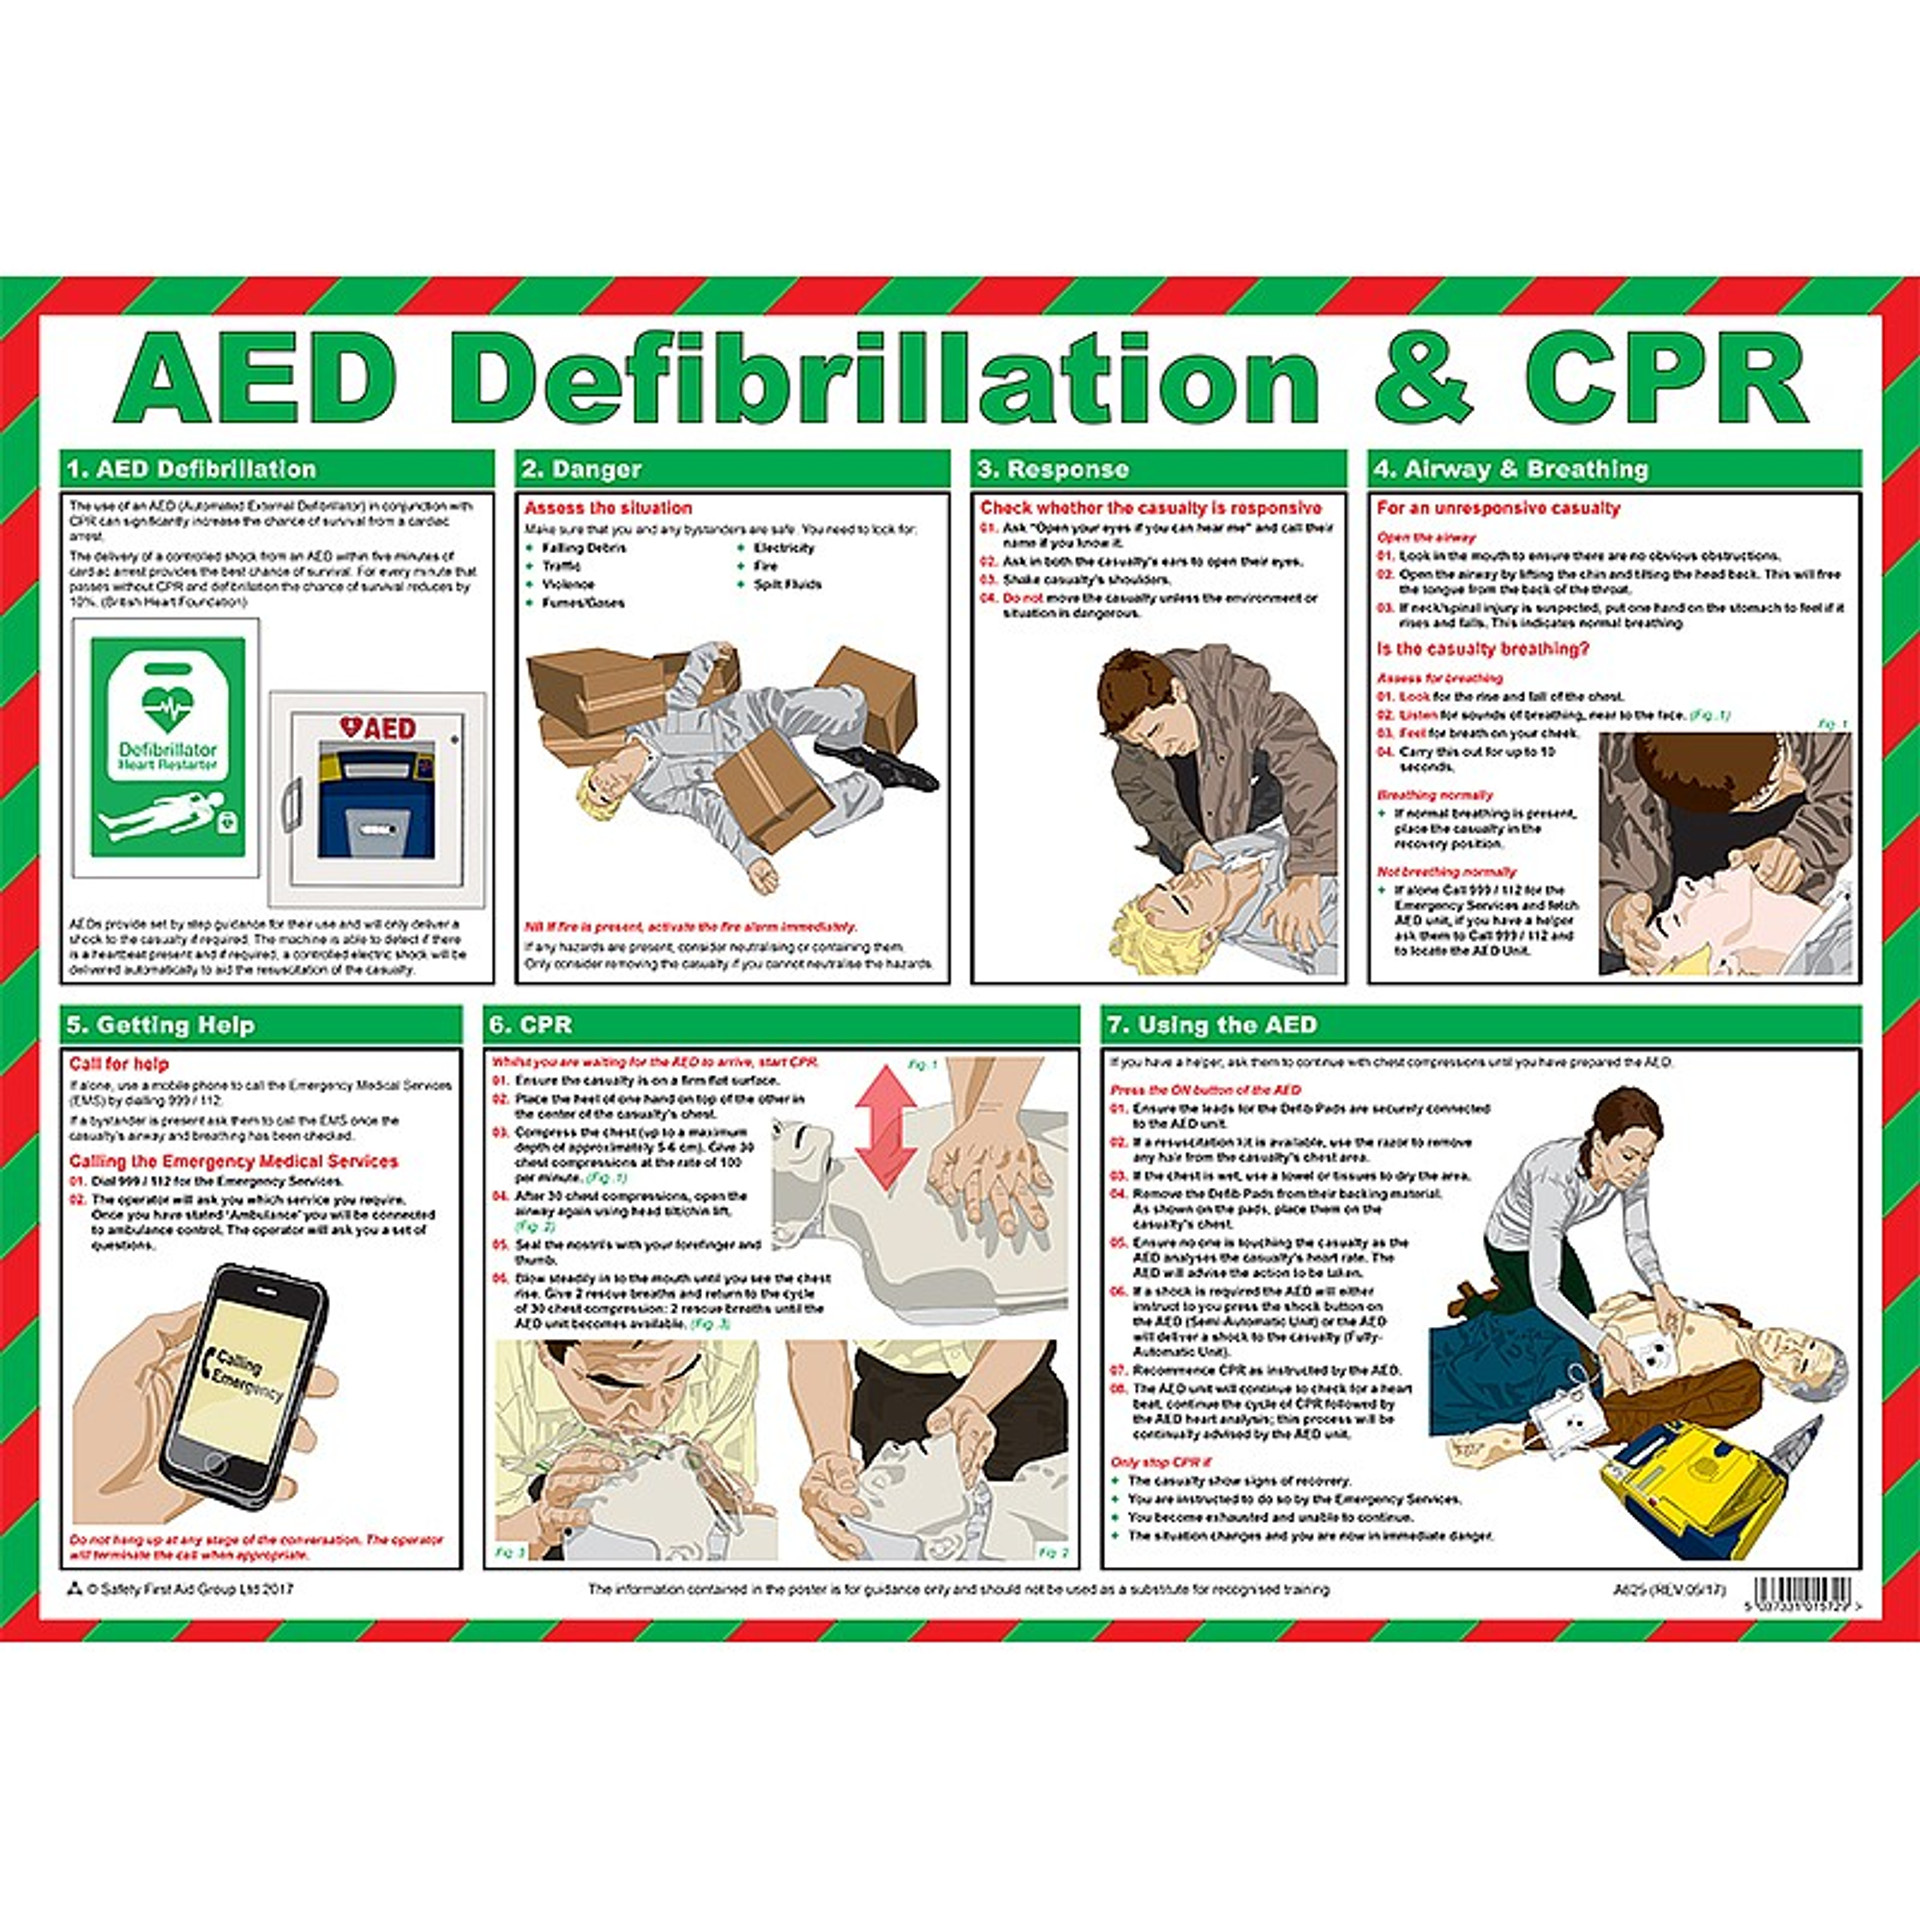 cpr-defibrillator-guide-safety-poster-laminated-59cm-x-42cm-cpr-gambaran